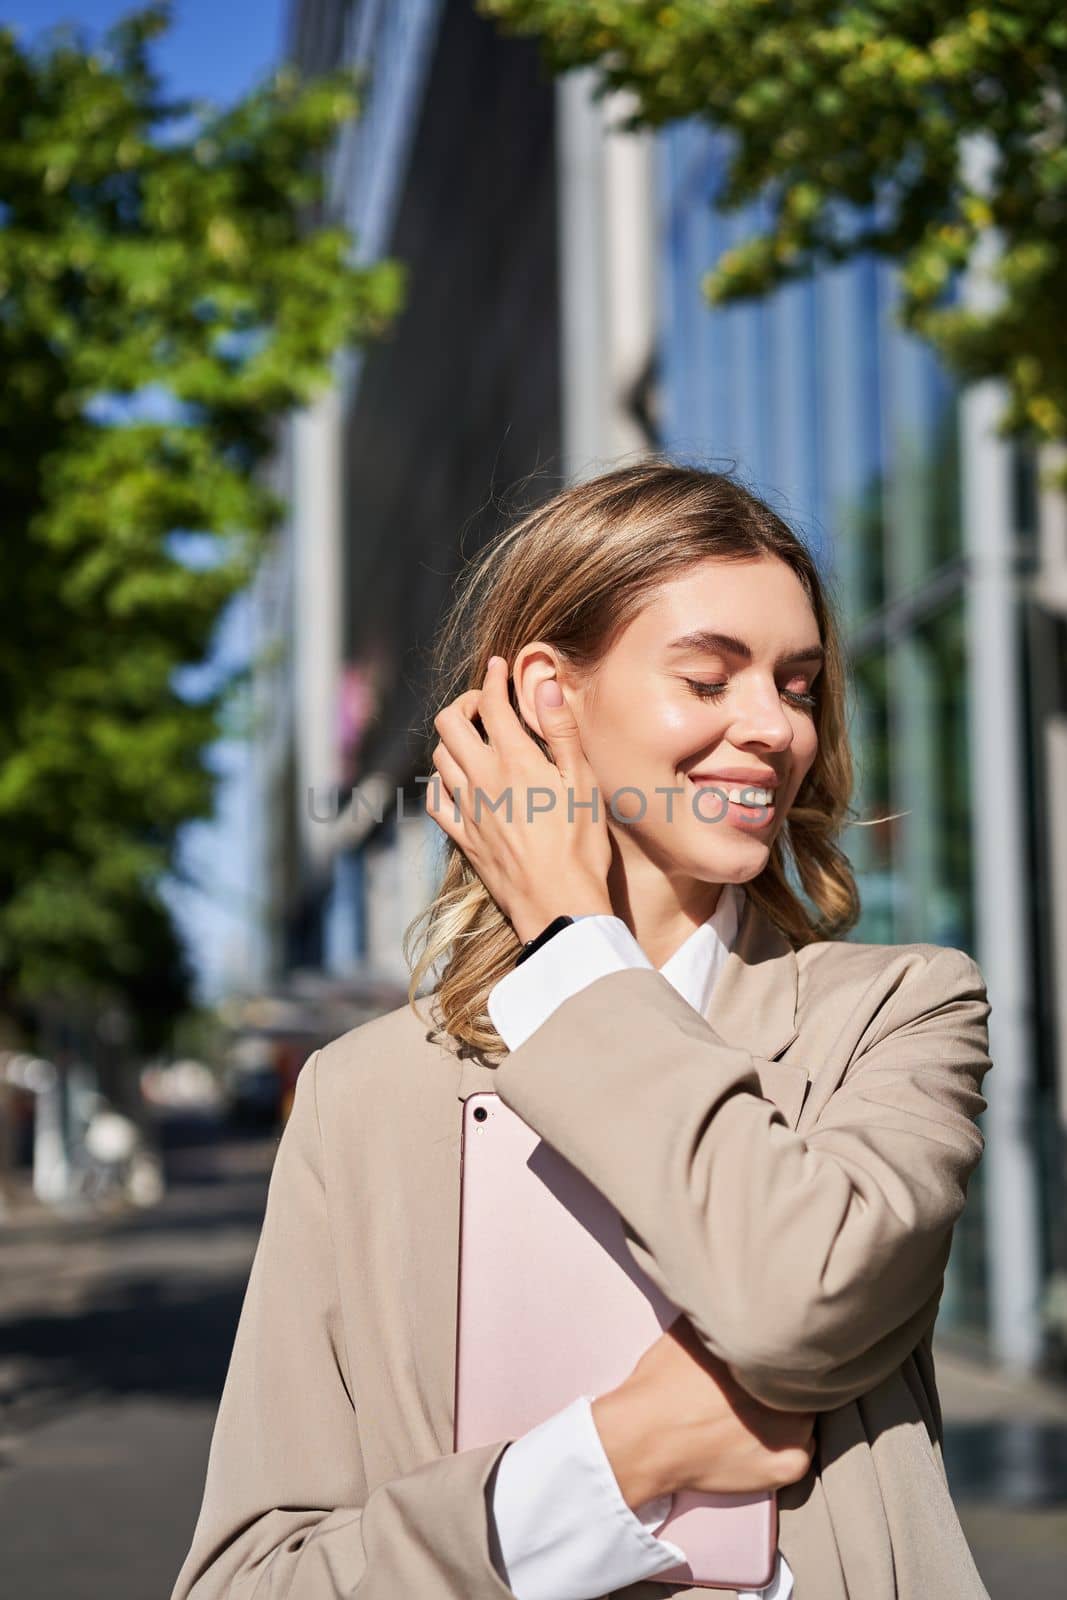 Vertical portrait of corporate woman holding digital tablet, posing on street, adjusting her hair and smiling.